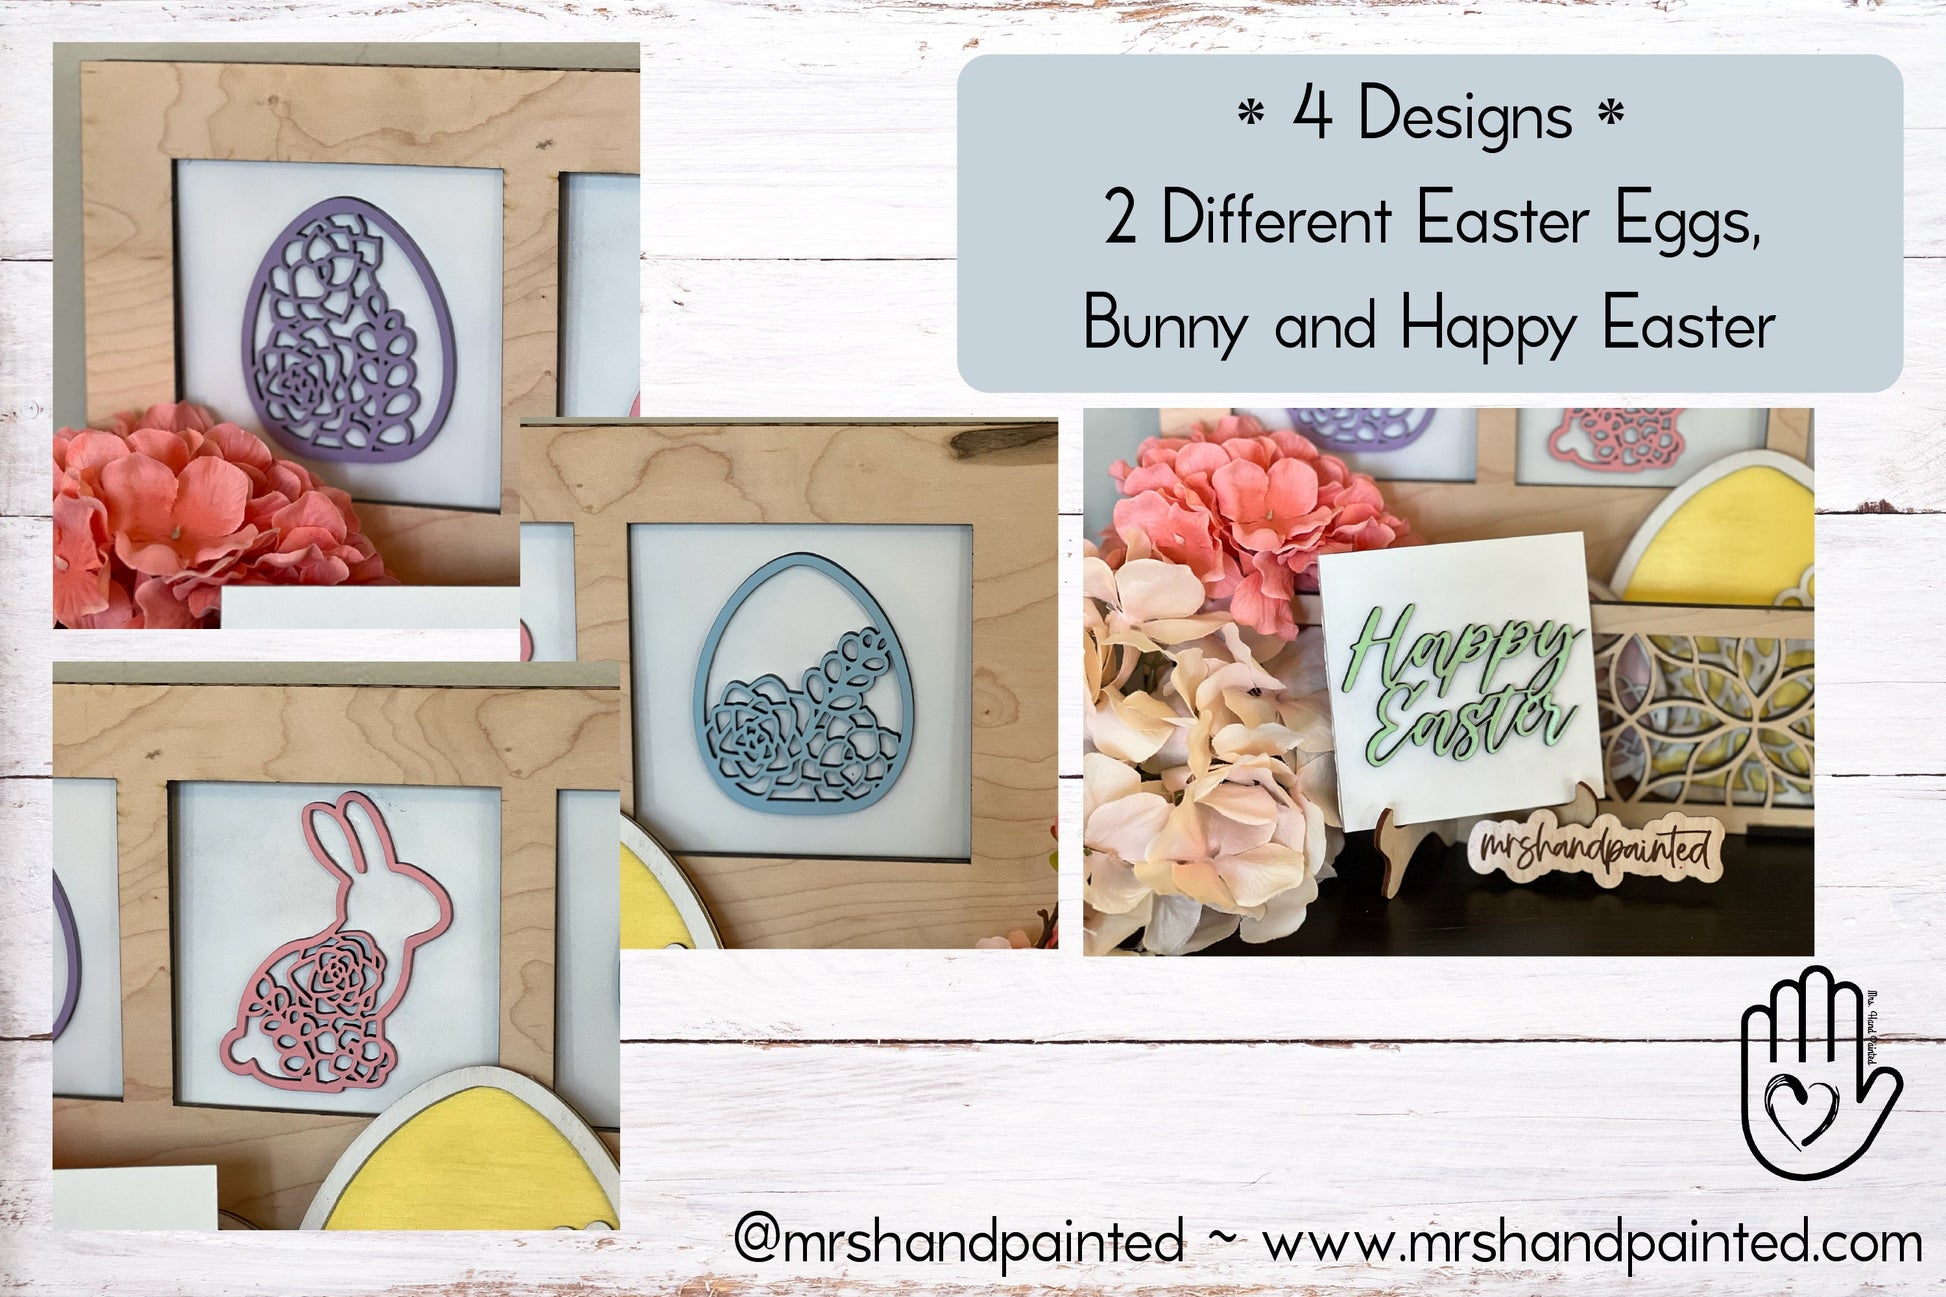 Easter Succulent Design Leaning Ladder Interchangeable Signs - Laser Cut Wood Painted